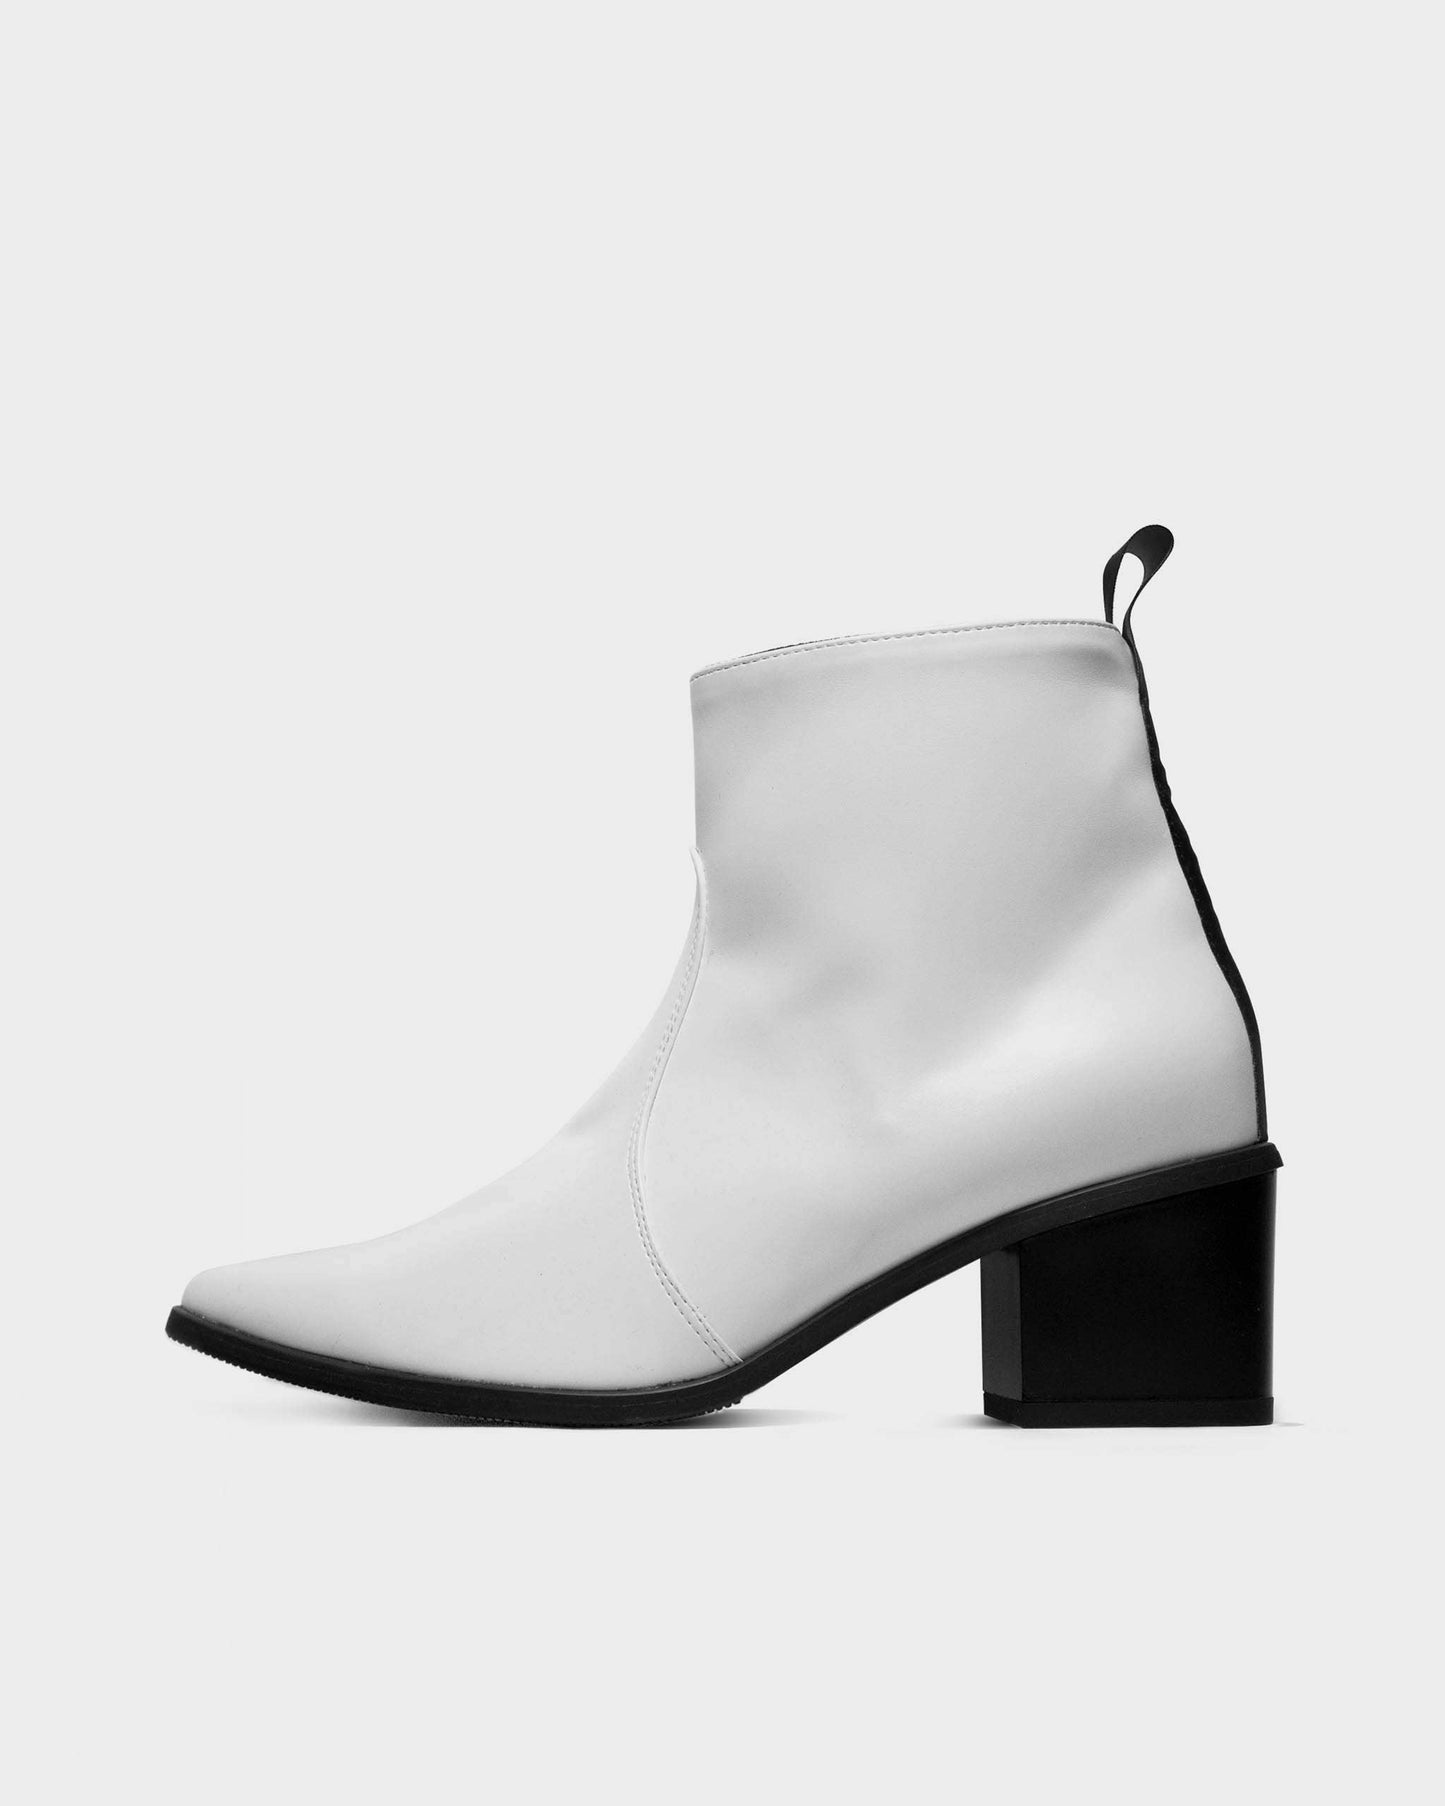 Swan No.1 White Nopal cactus leather boots - sample sale